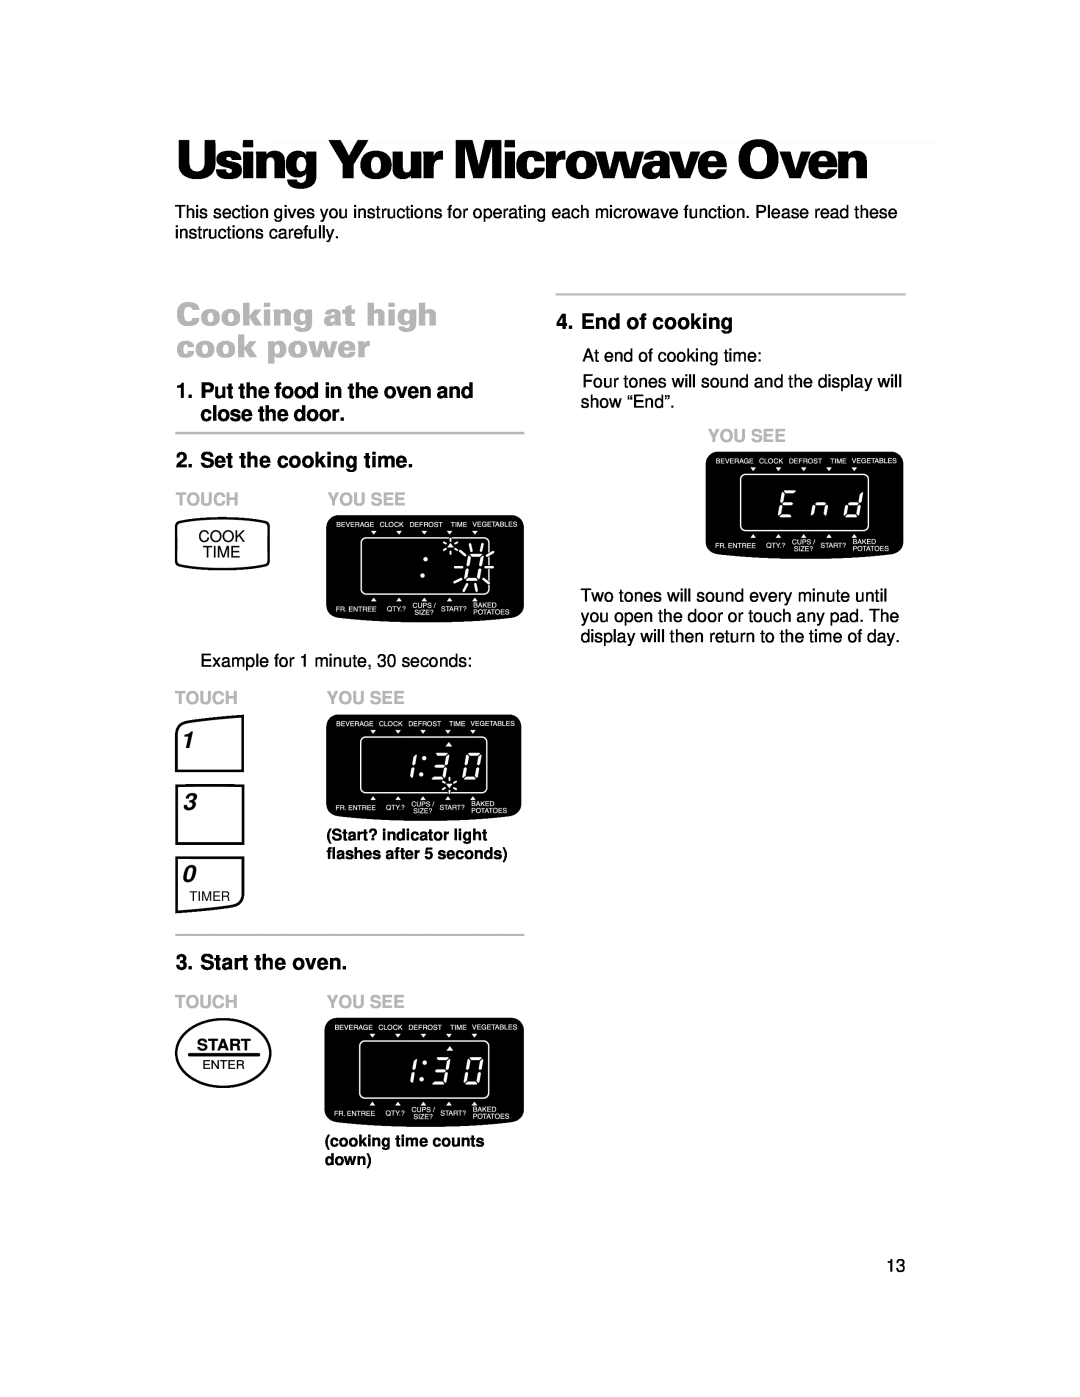 Whirlpool CMT061SG Using Your Microwave Oven, Cooking at high cook power, Put the food in the oven and close the door 